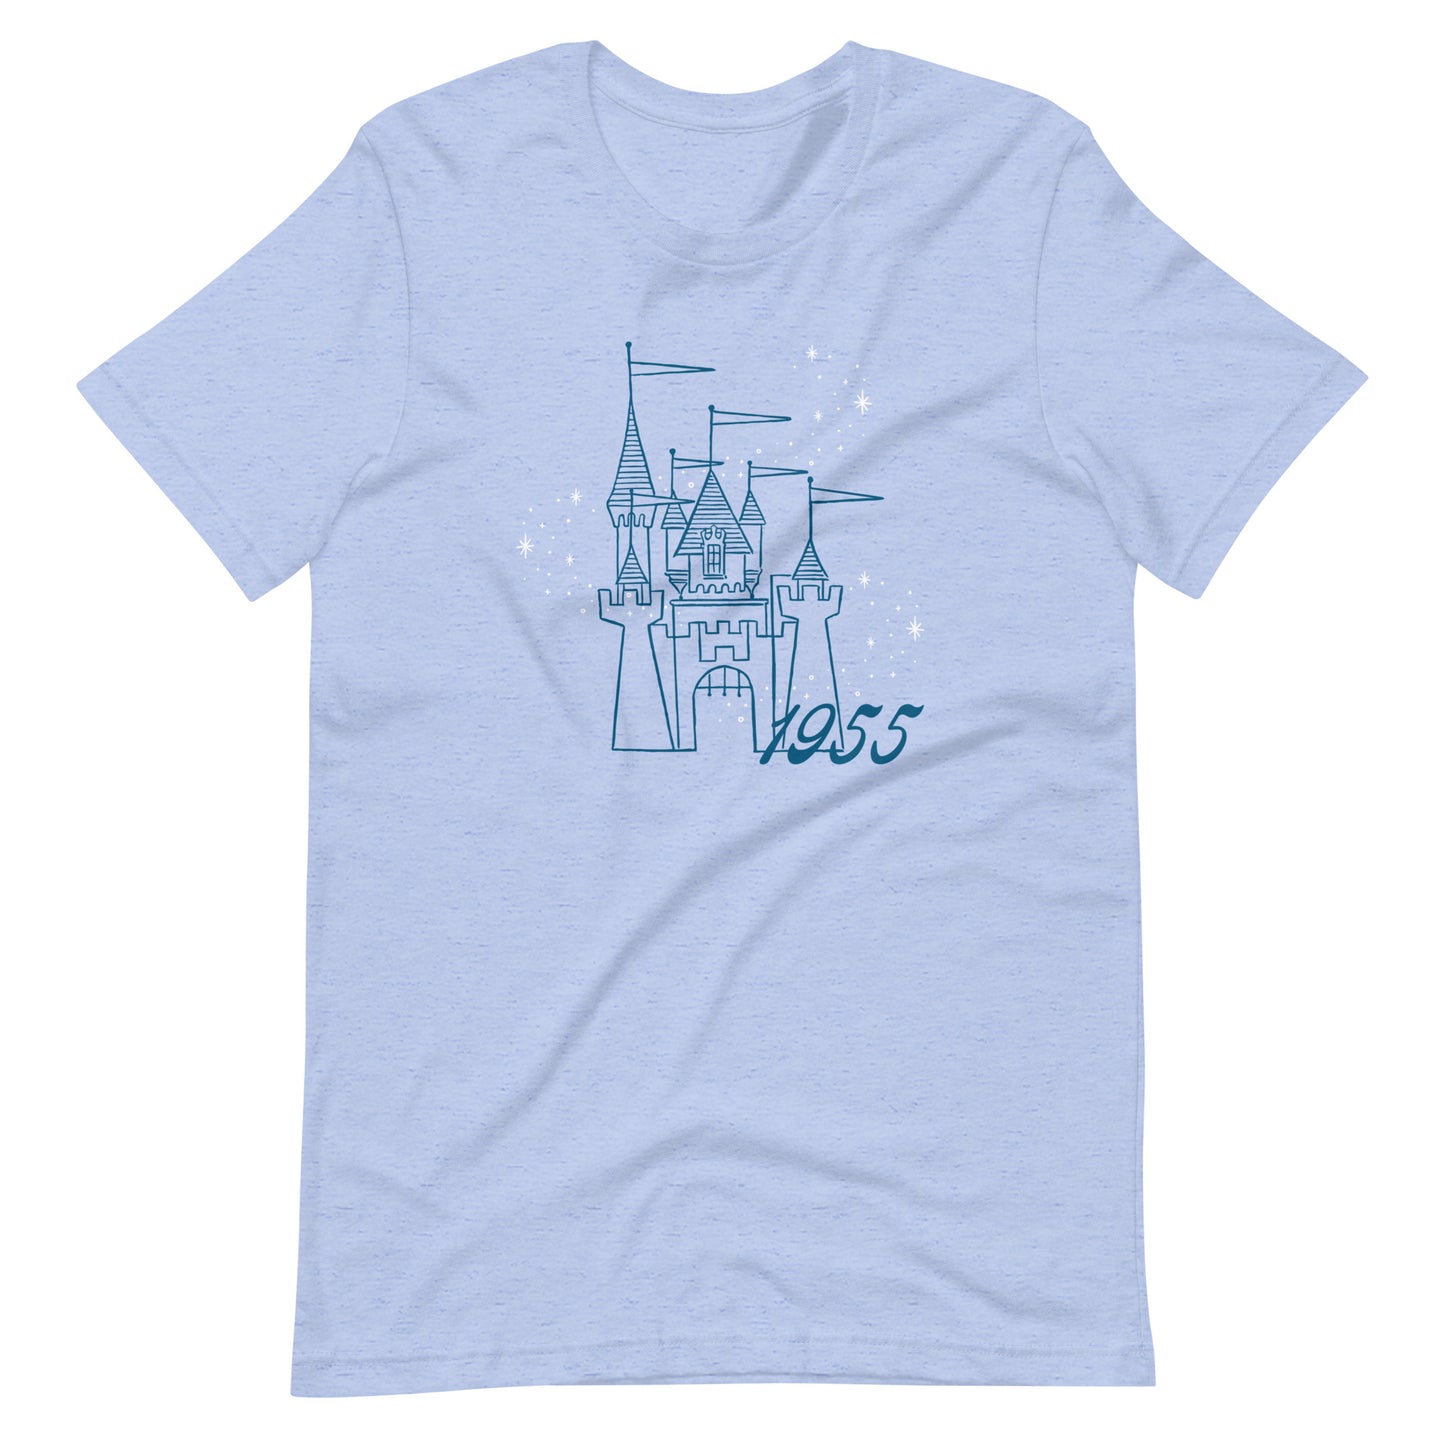 Blue t-shirt printed with vintage style sketch of a Castle with the year 1955 and pixie dust above the castle.